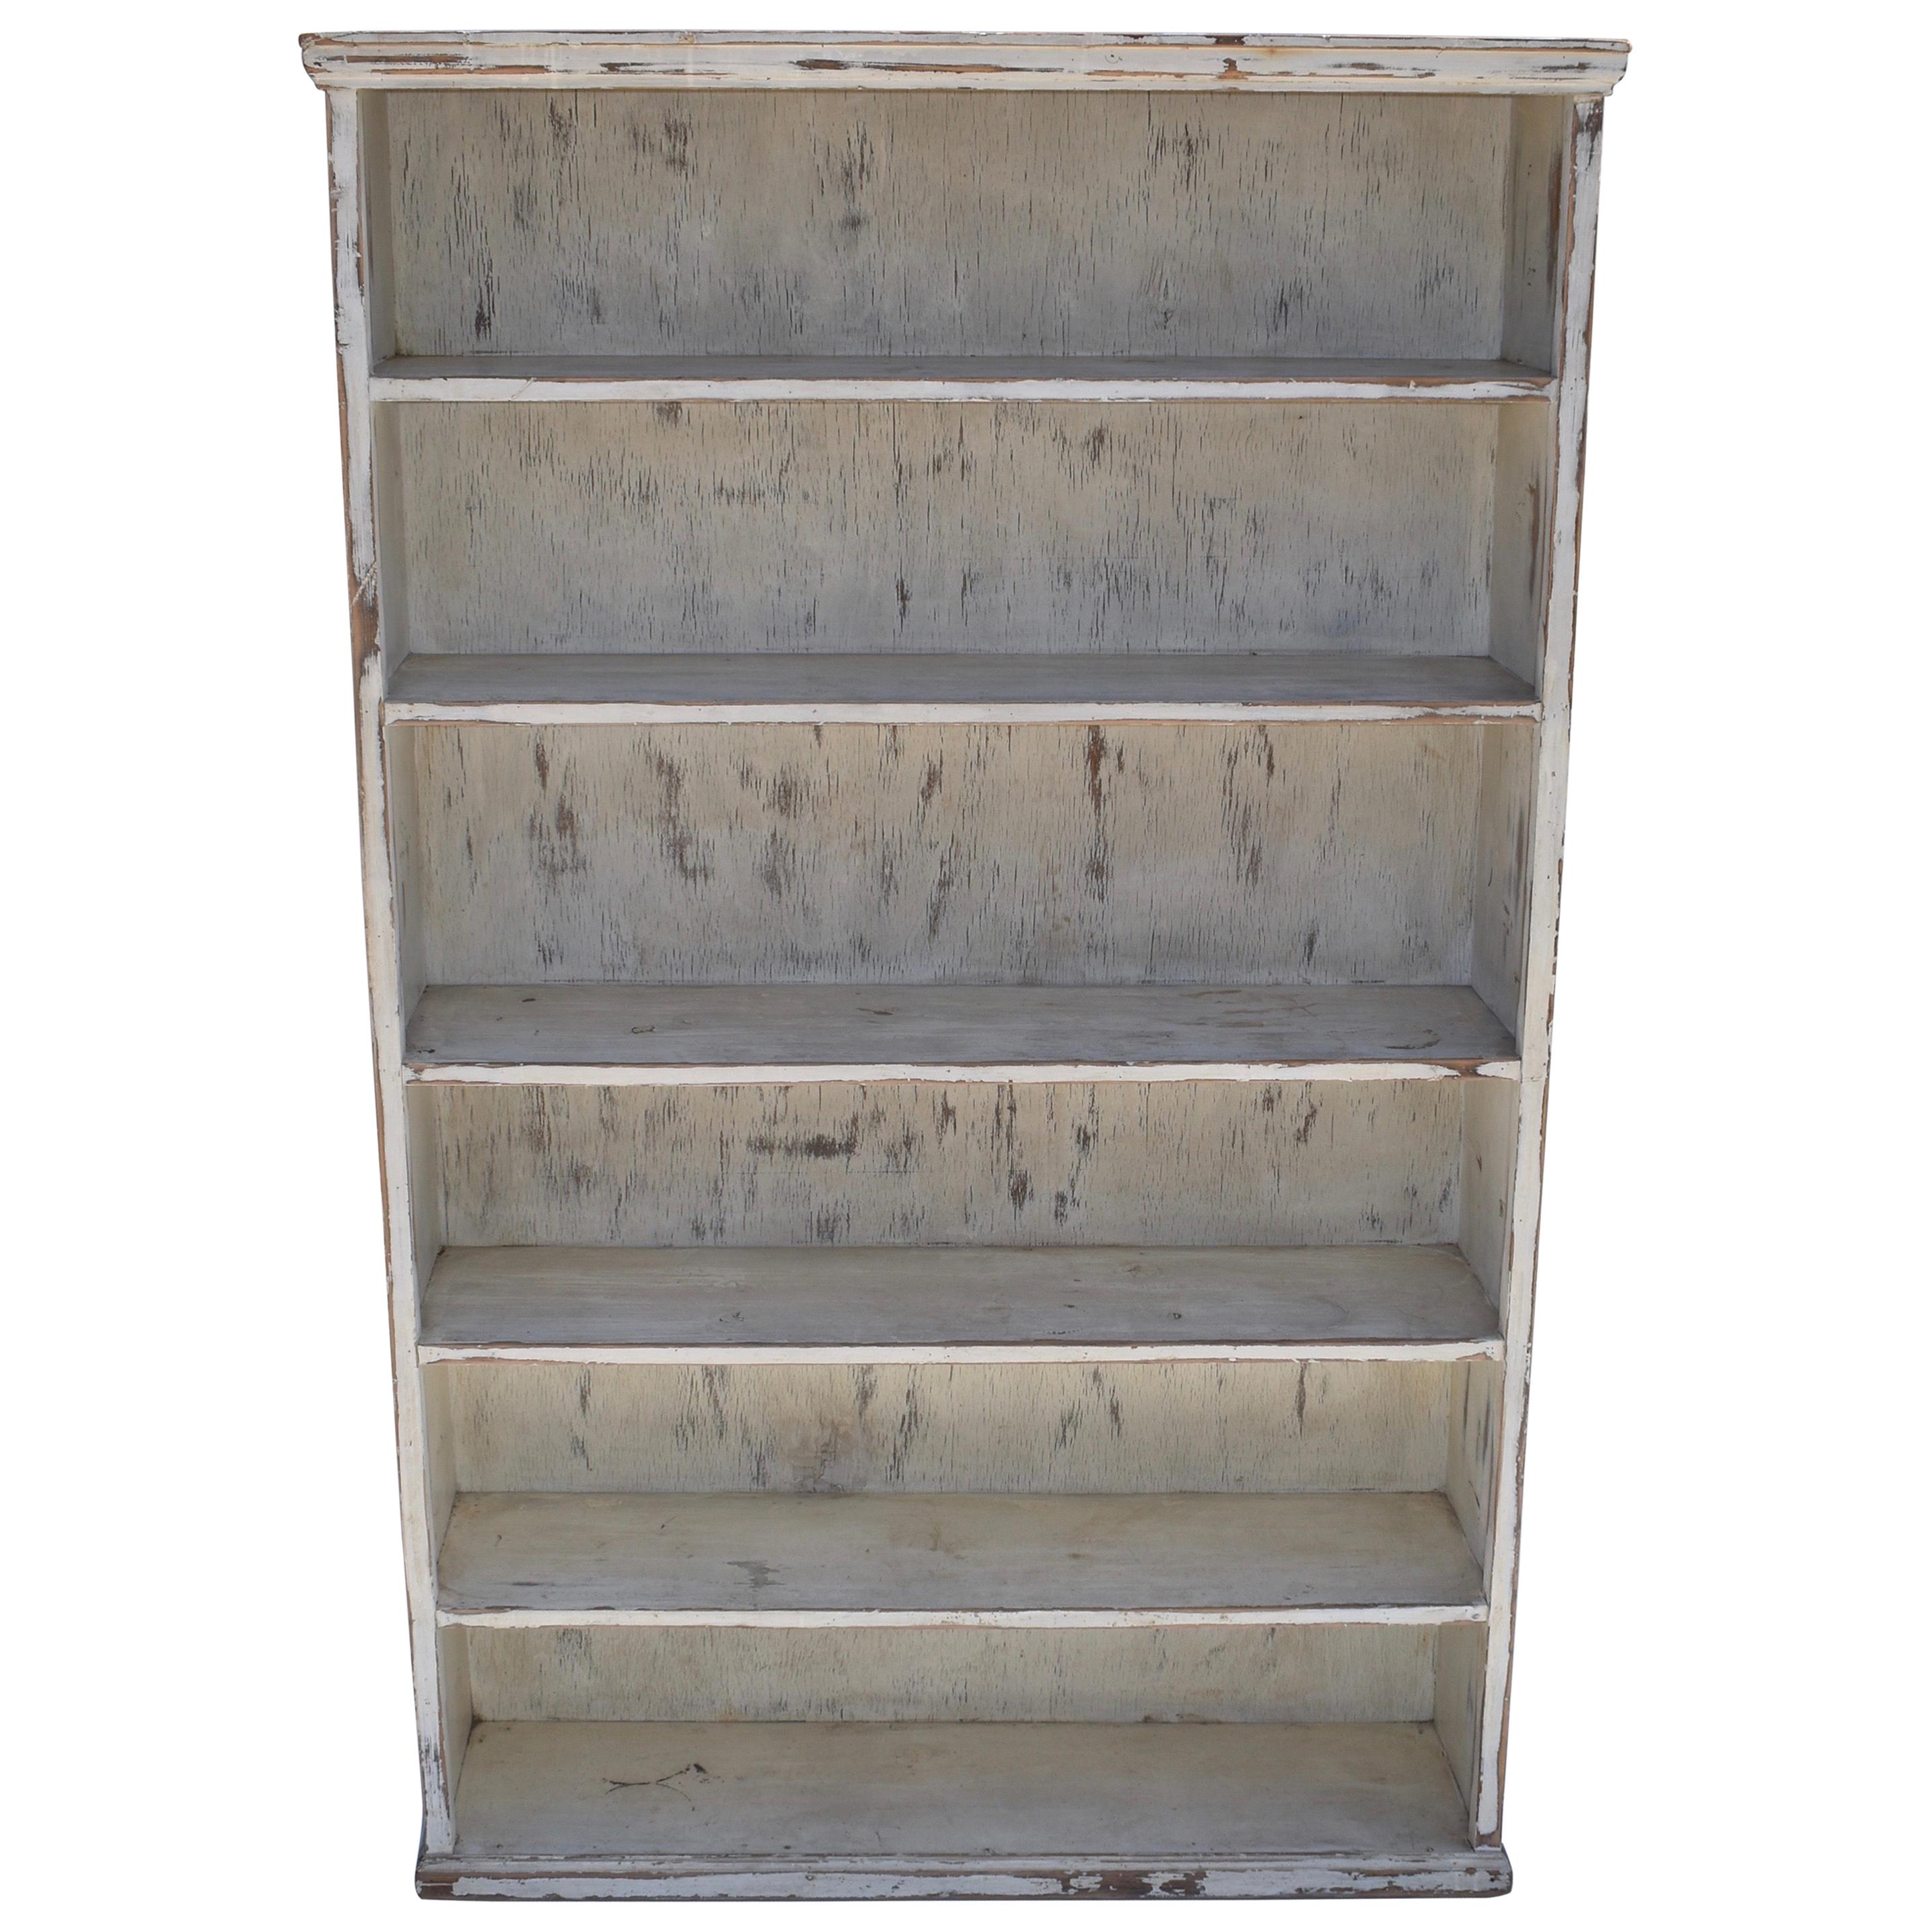 Vintage Painted Pine Pantry or Utility Shelves